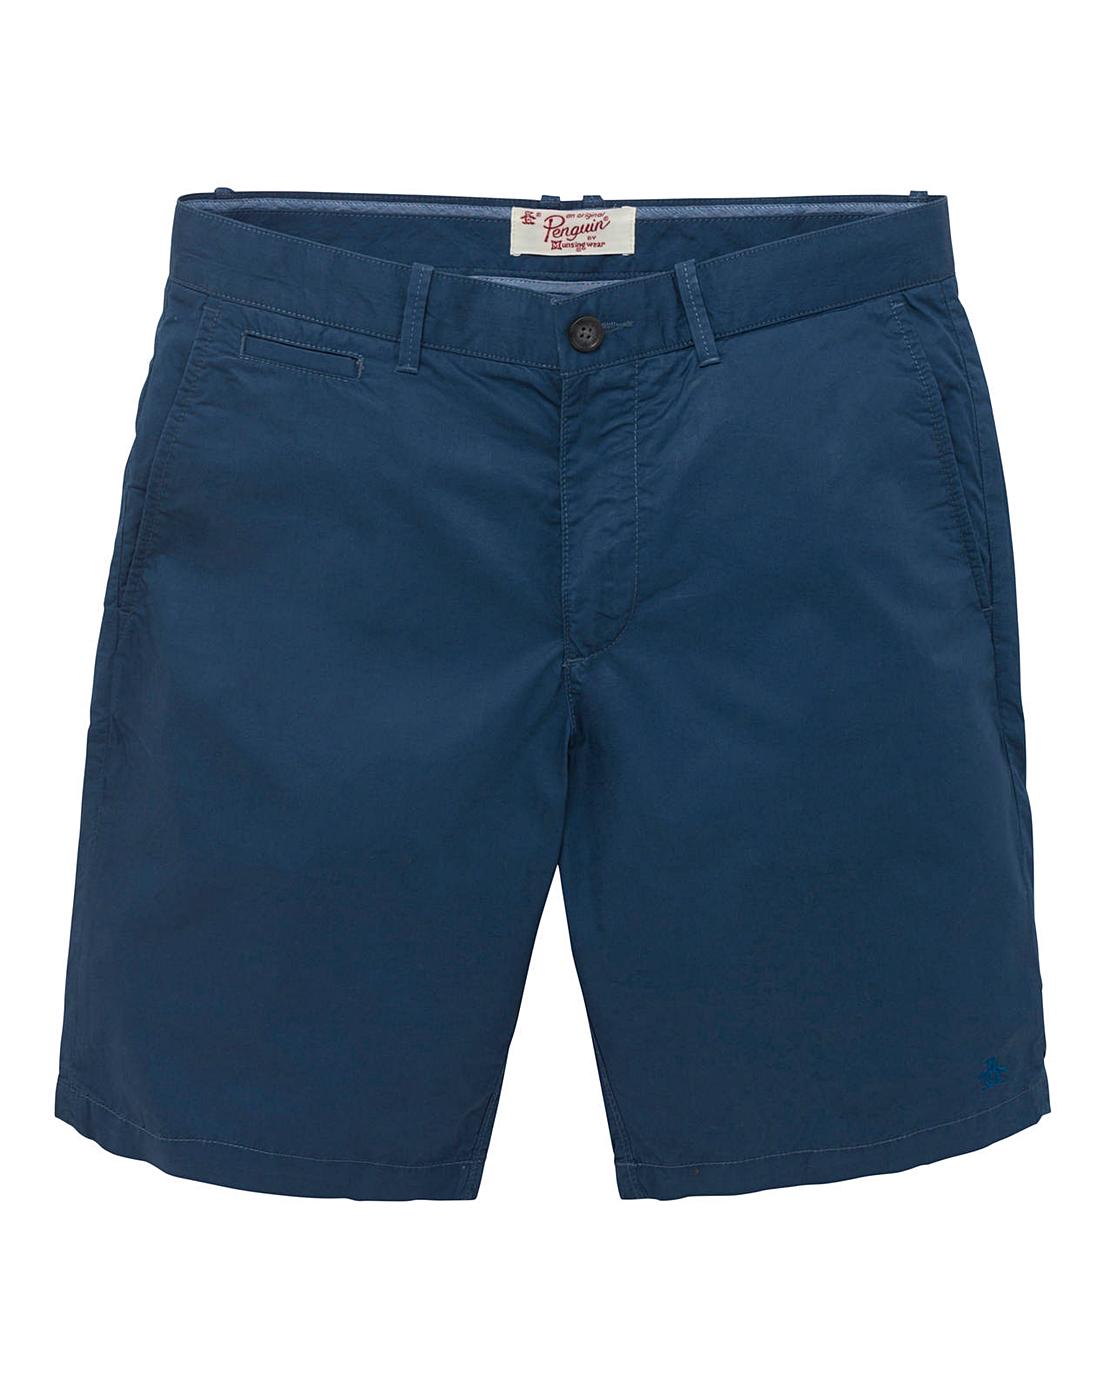 Original Penguin Mighty Cotton Shorts | Crazy Clearance